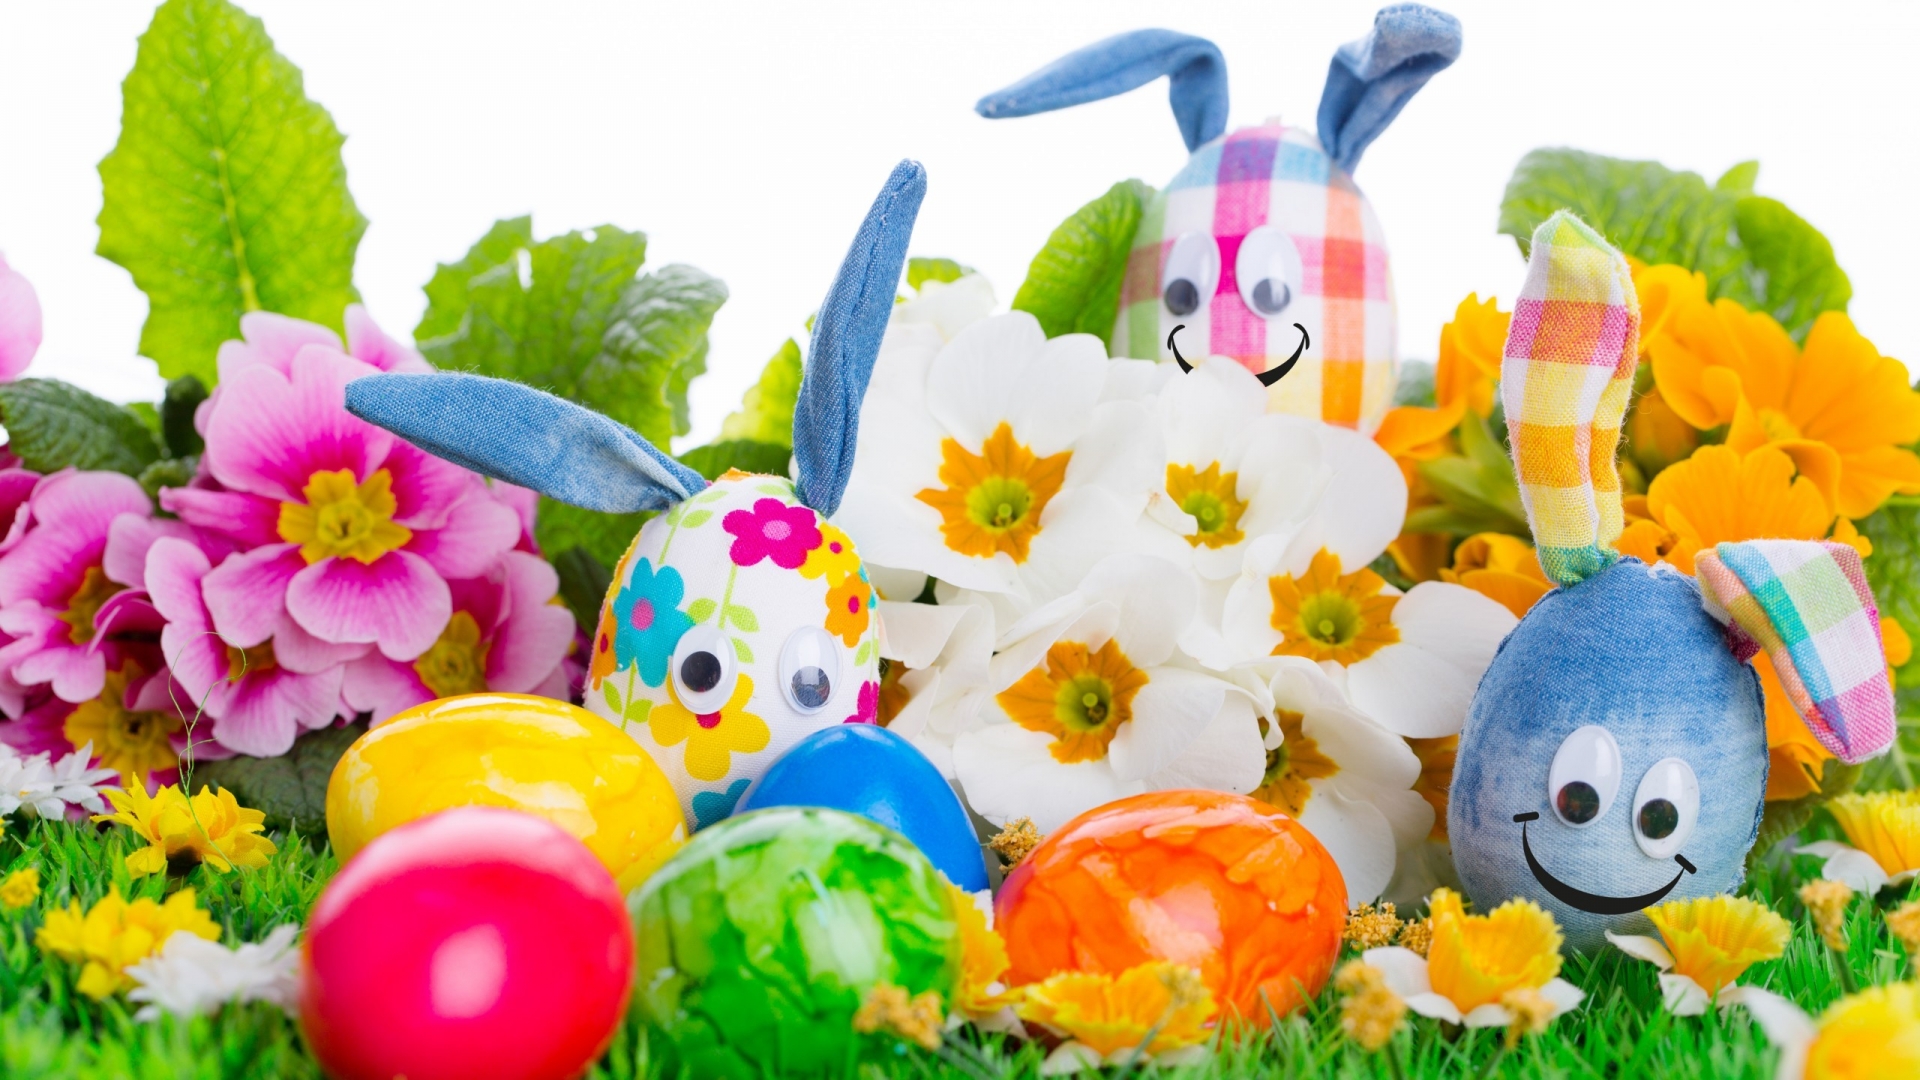 Handcrafted Easter Eggs for 1920 x 1080 HDTV 1080p resolution